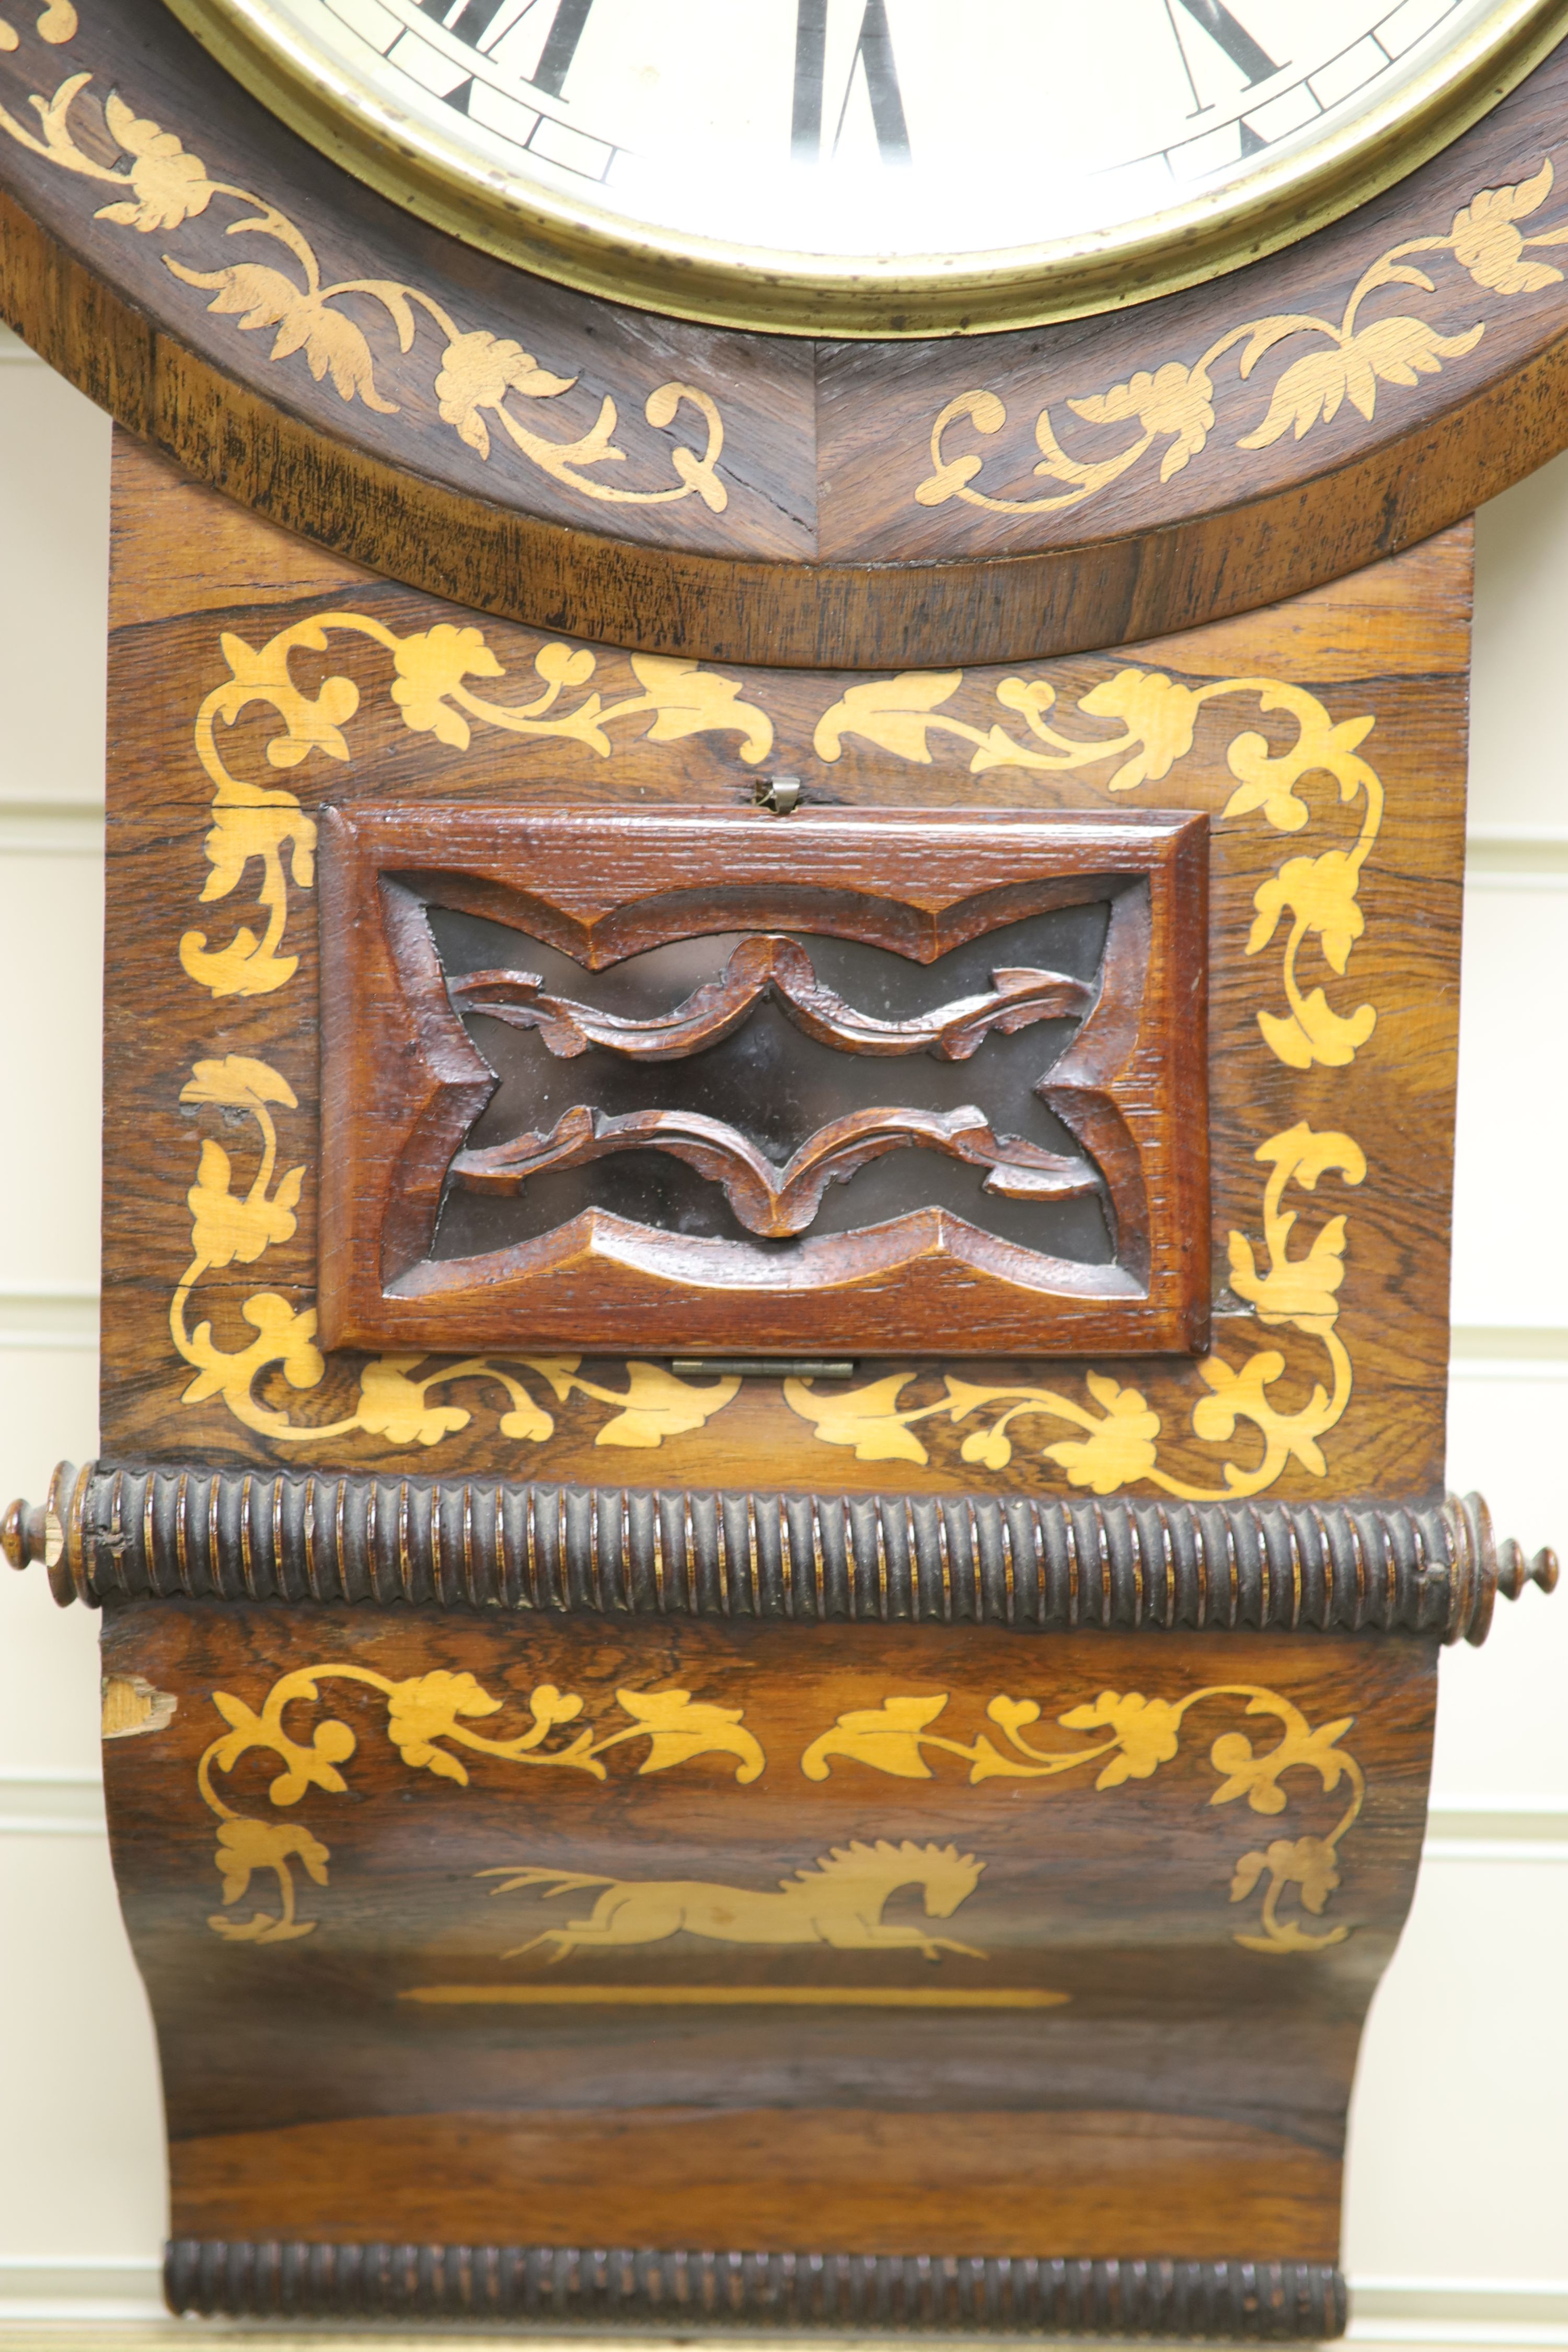 A Victorian inlaid rosewood wall clock